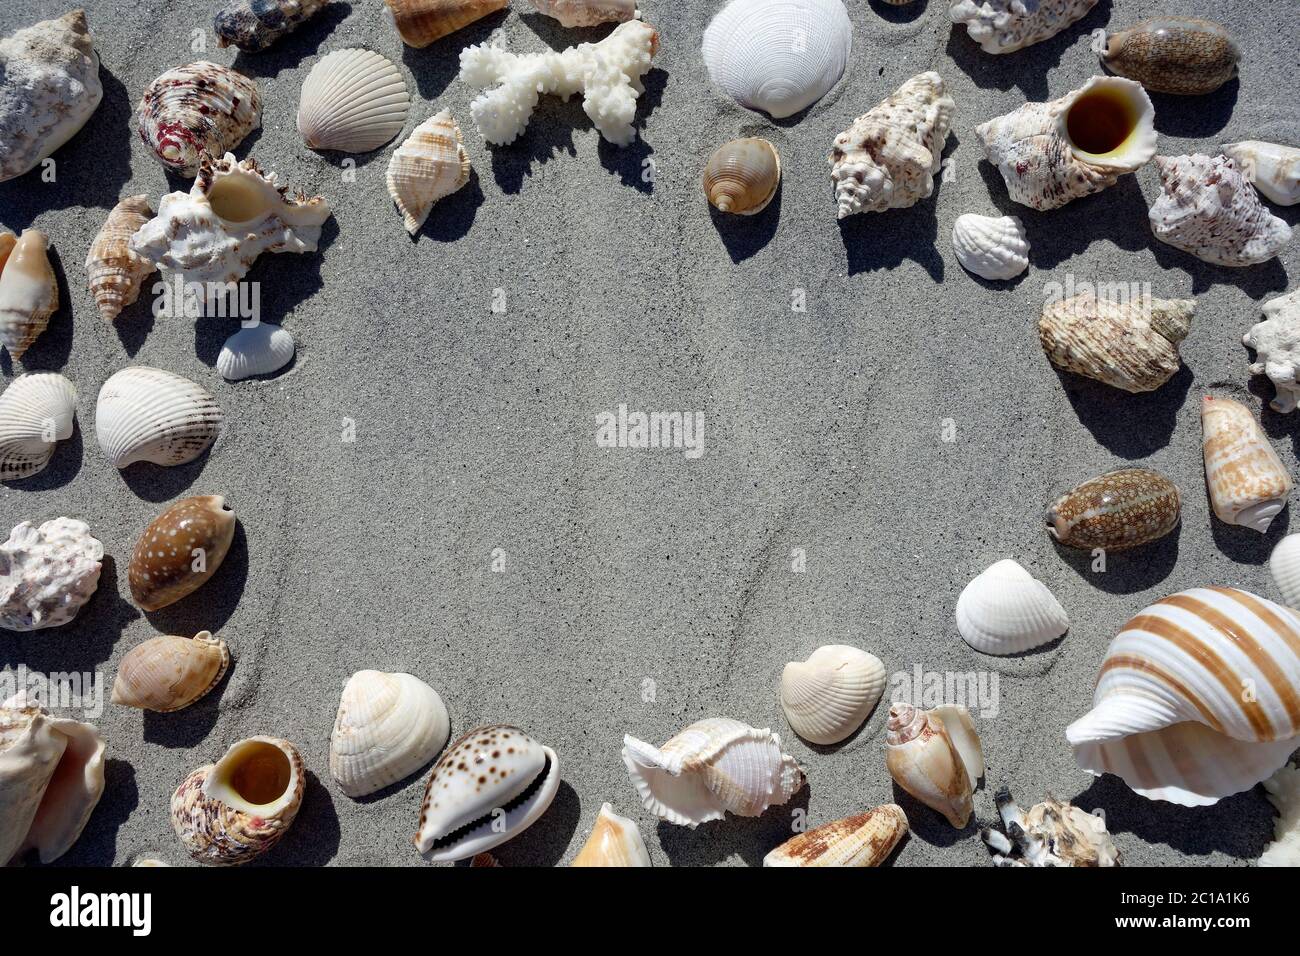 seashells on sand with a space for a message Stock Photo